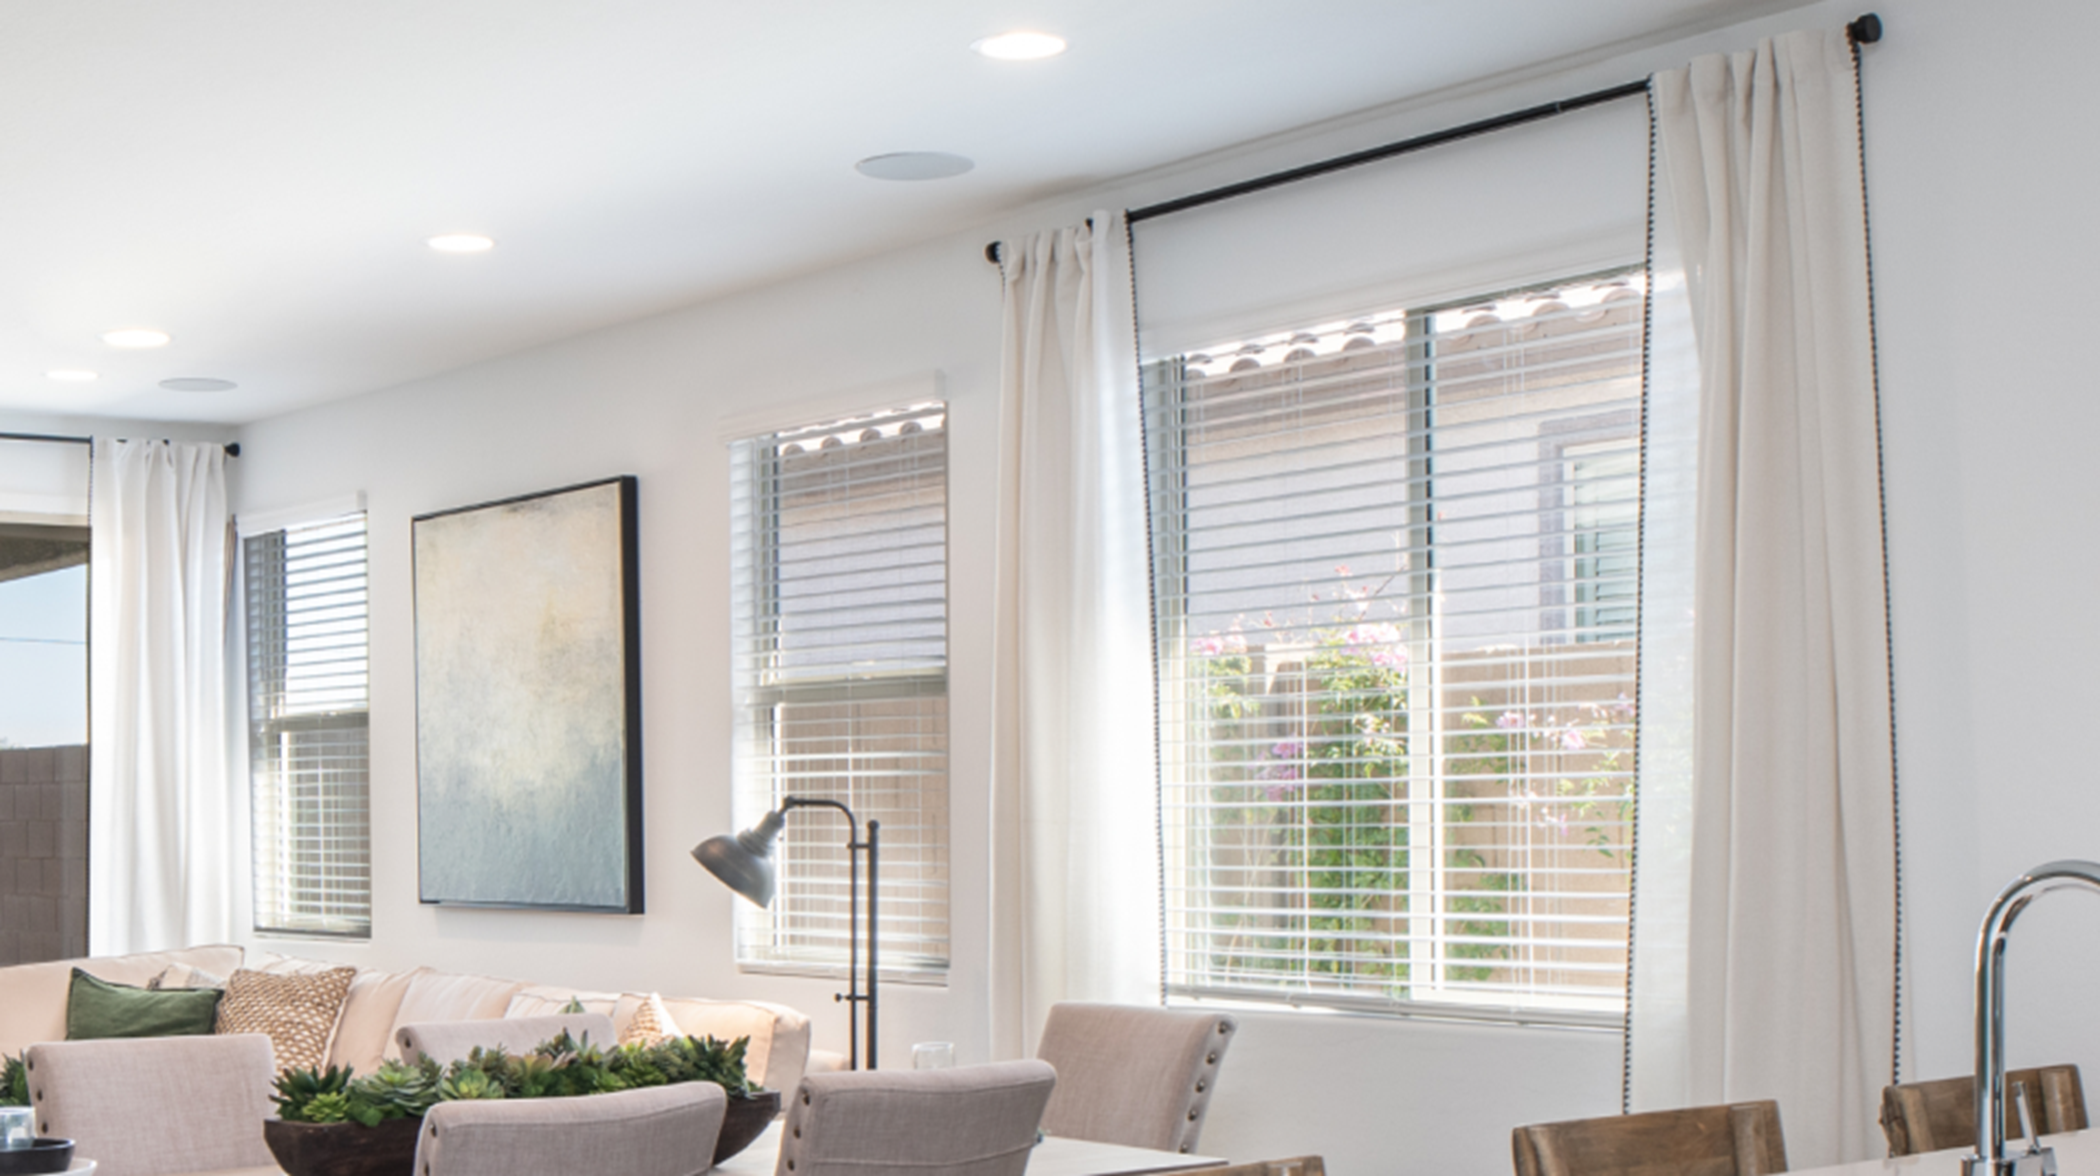 Image of blinds